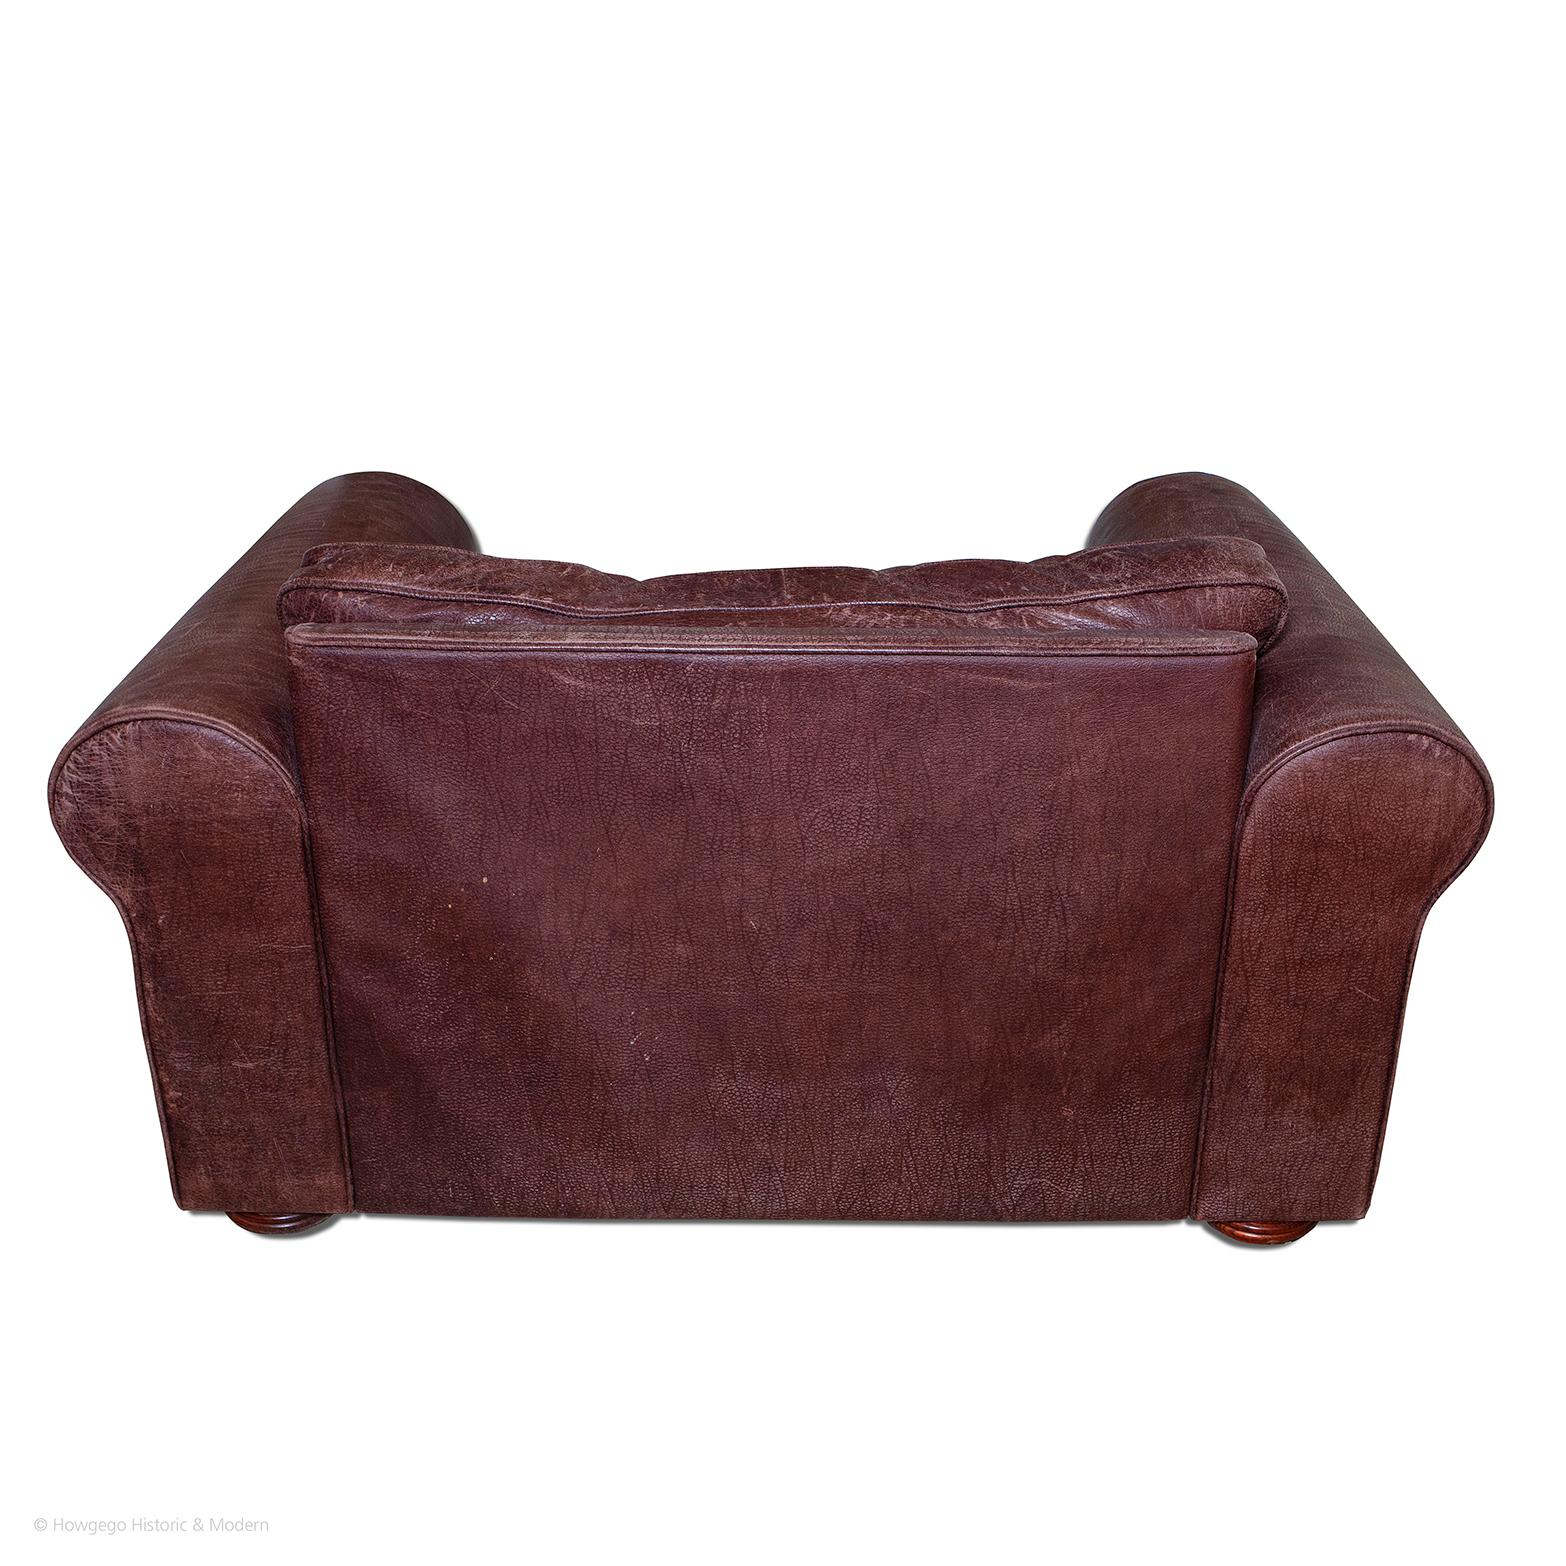 English Settee Sofa 1-Seat Armchair Leather Brown Country House Club Modern